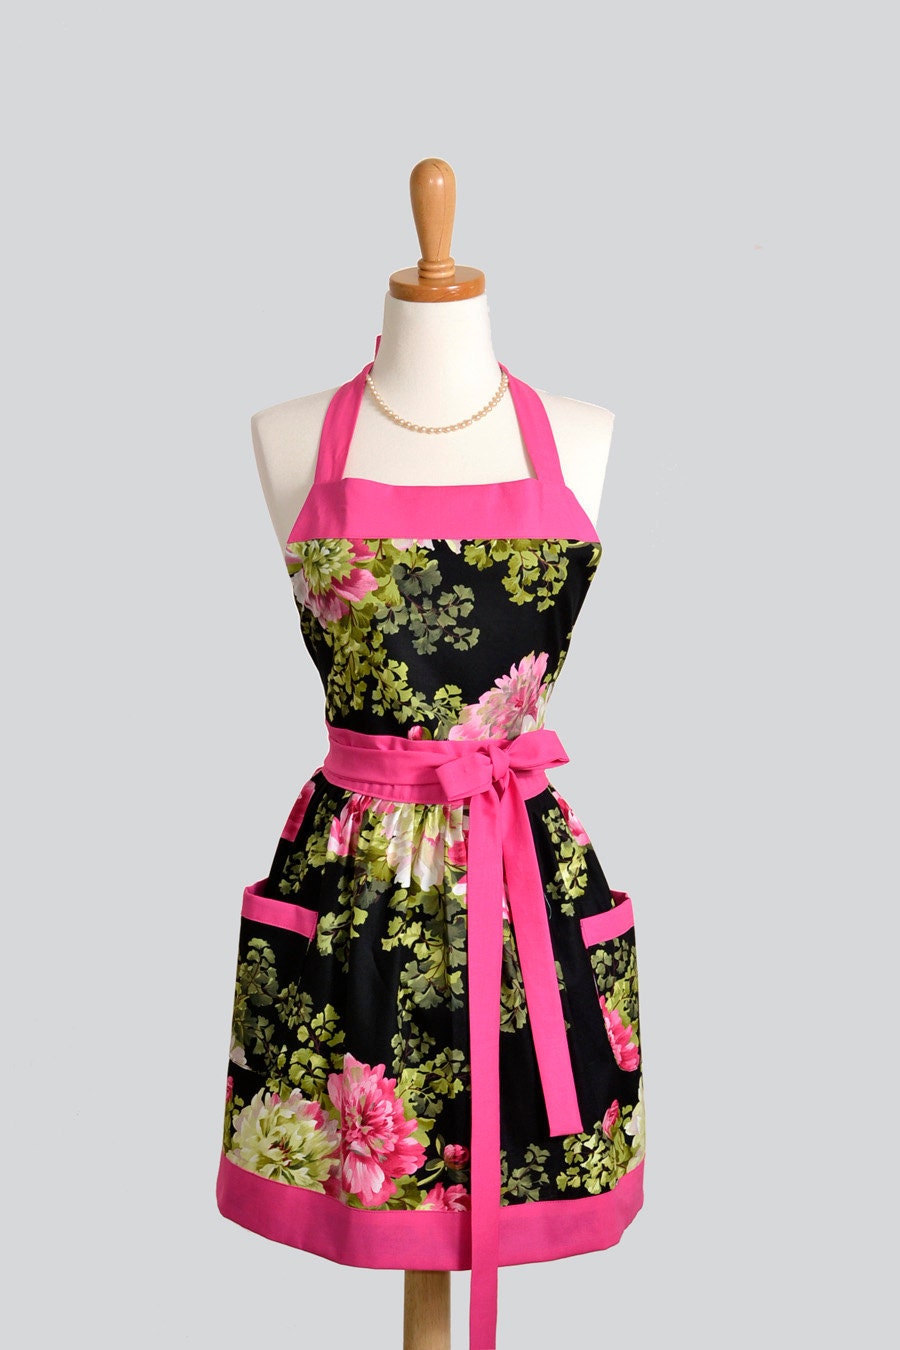 Womens Bib Apron / Vintage Inspired Black Bib with Hot Pink Rose Bouquets Trimmed in Hot Pink Dots